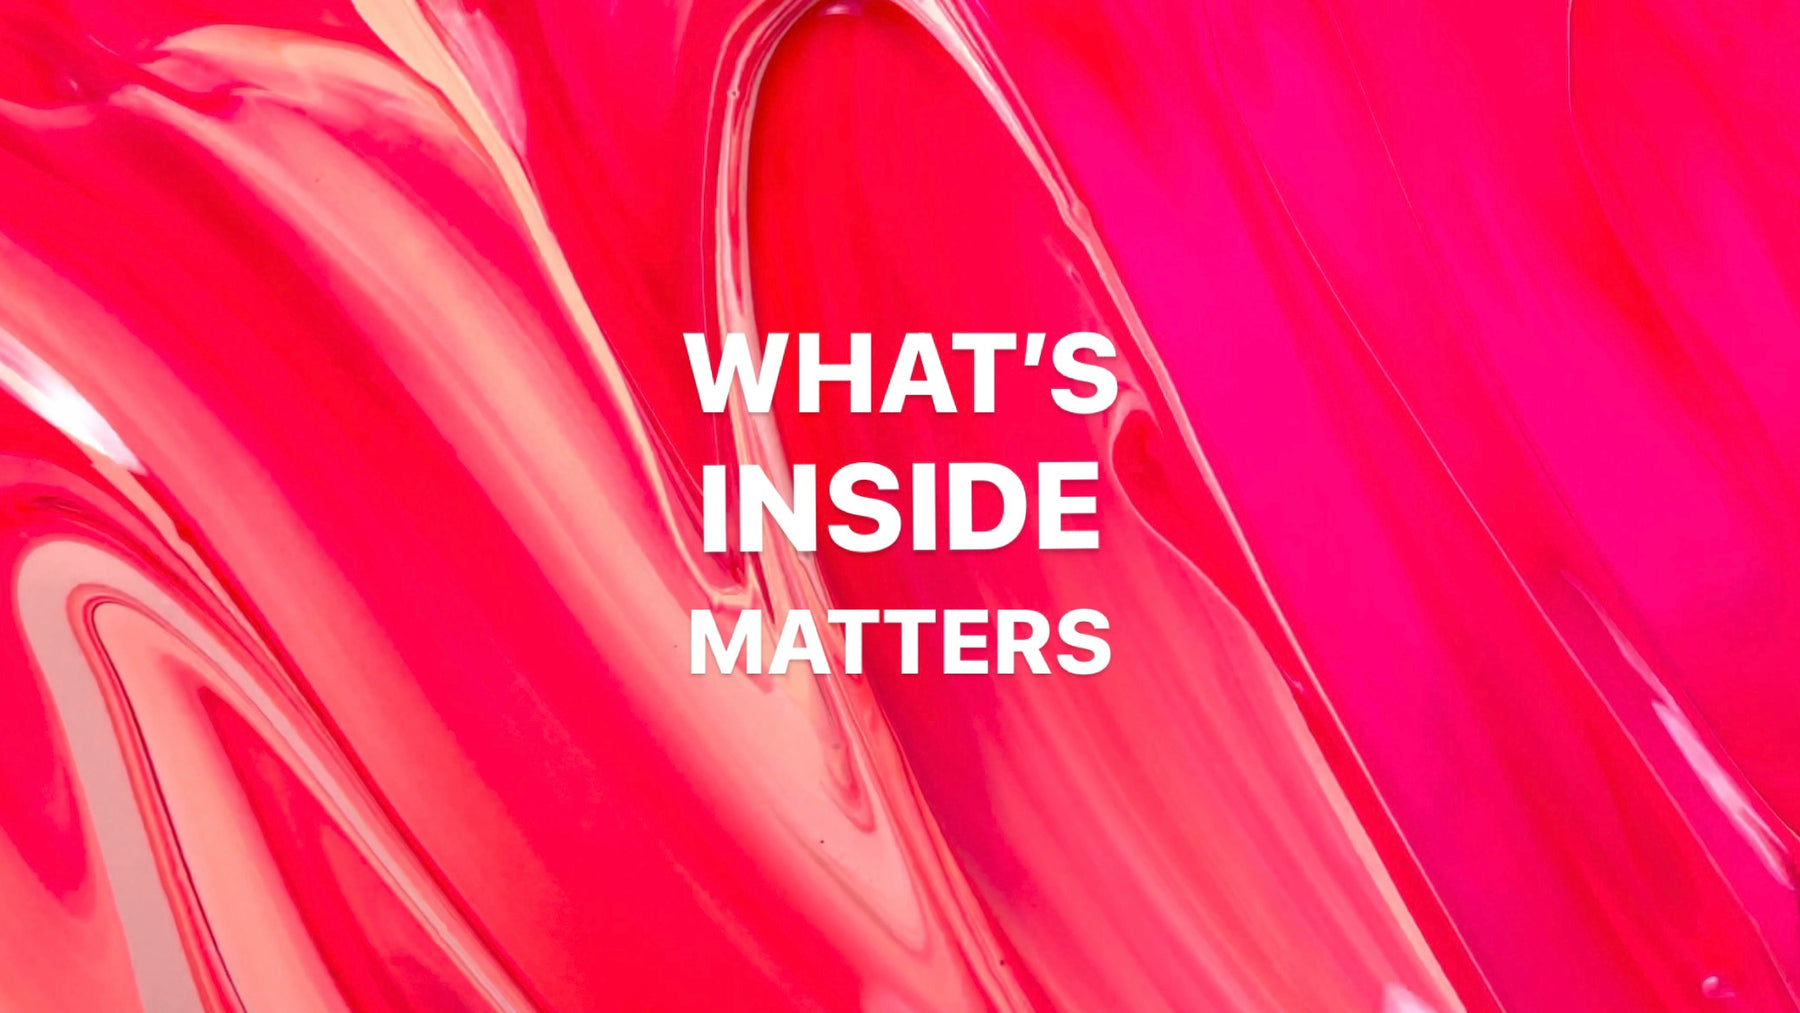 Happy National Clean Beauty Day! | What's Inside Matters | Clean Nail Products by Light Elegance | HEMA Free Gel Nail Products